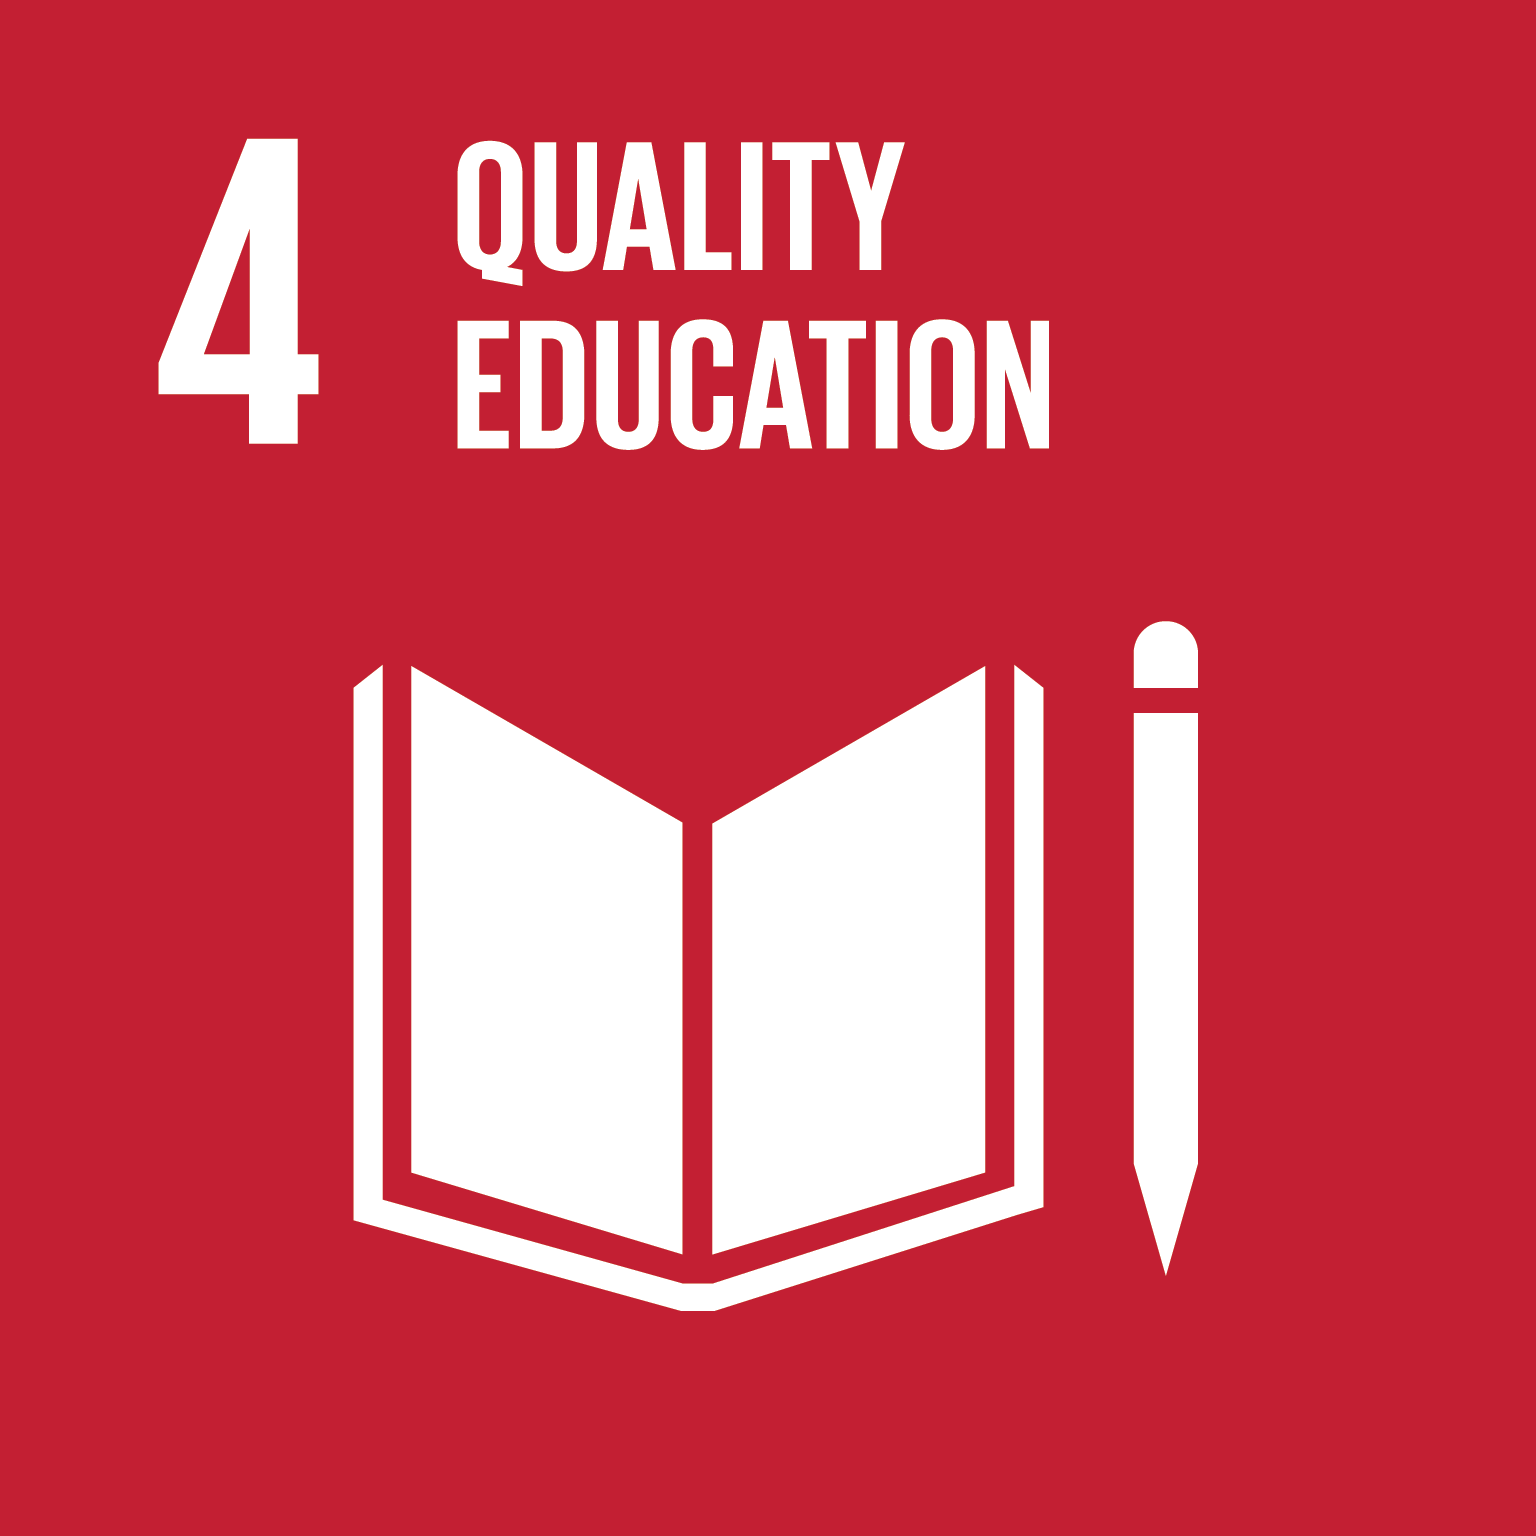 good health and well being sustainable development goals essay